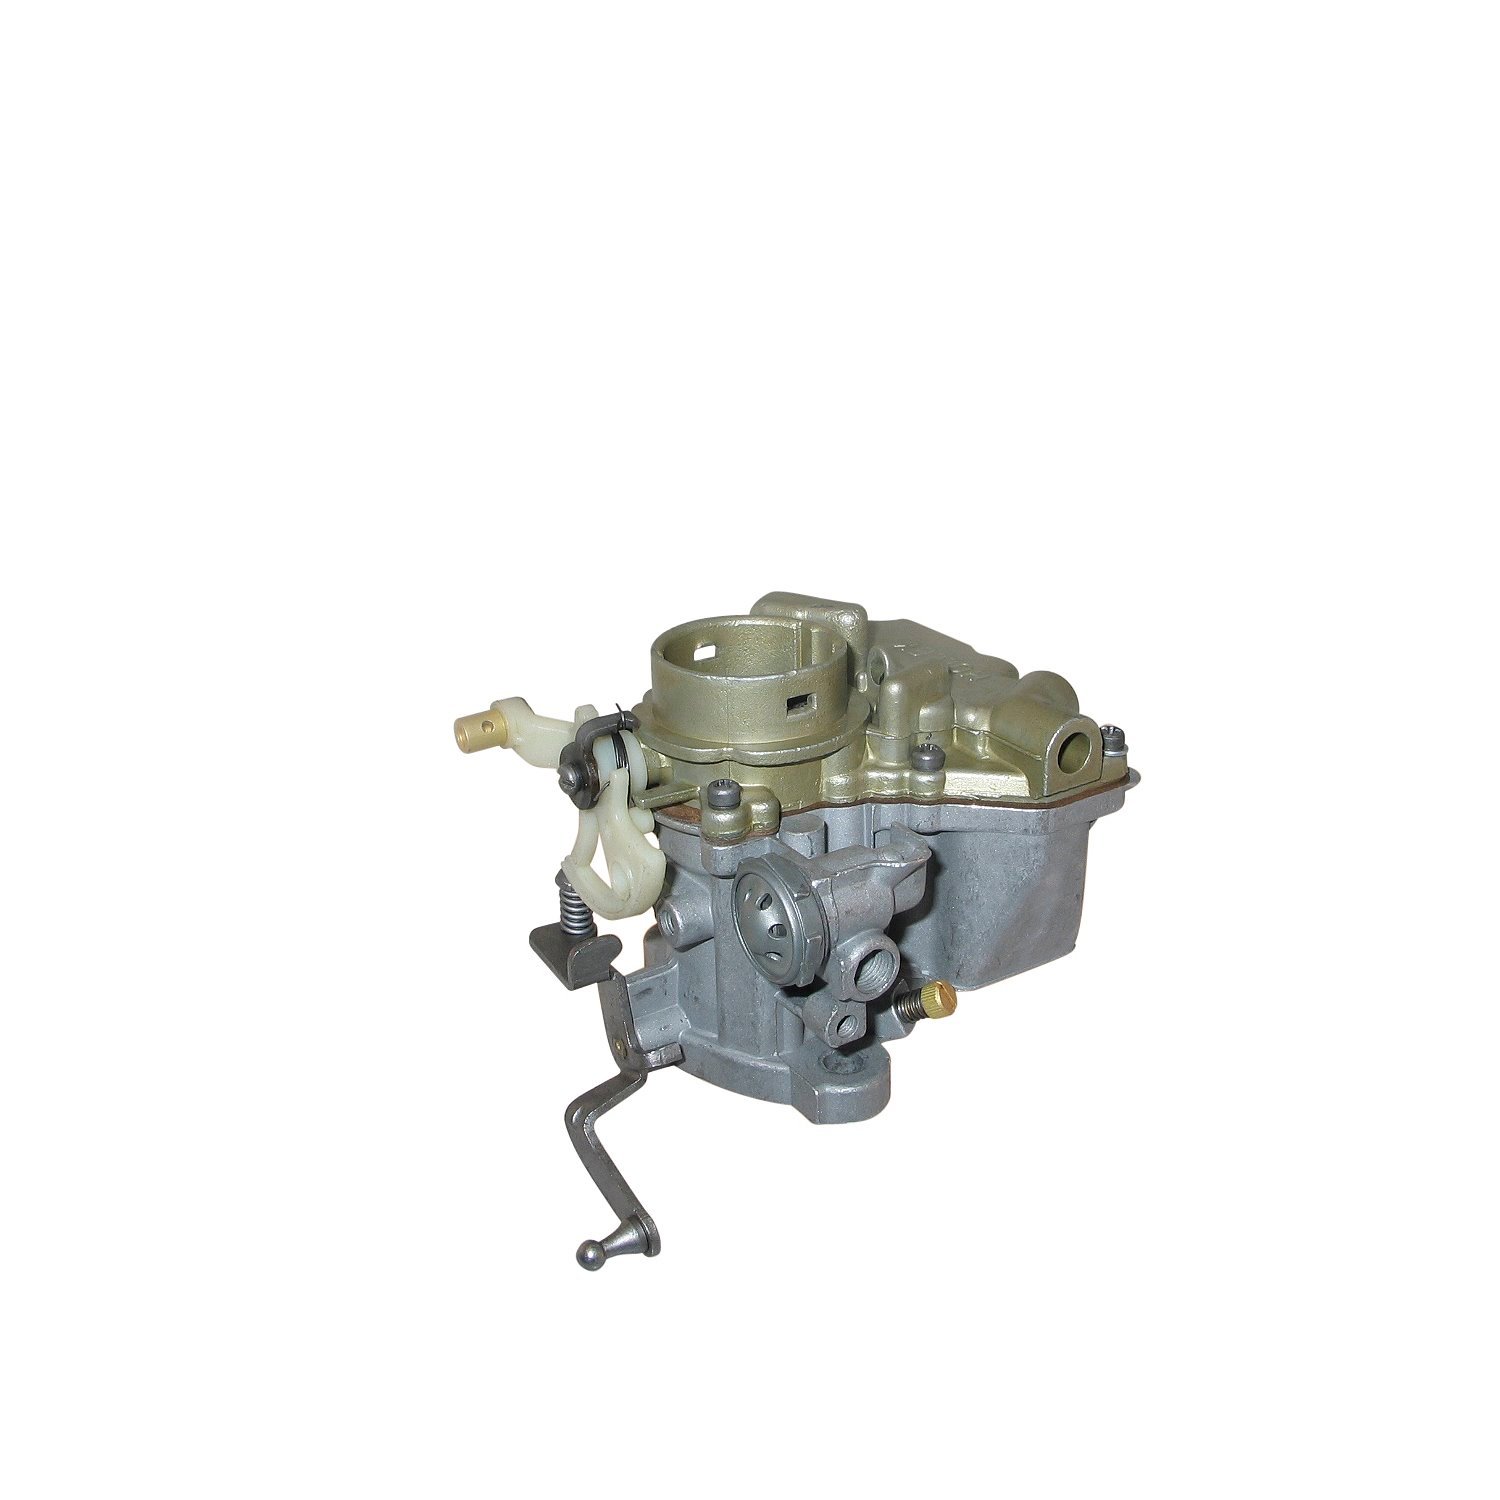 10-1039 Holley Remanufactured Carburetor, 1909-Style